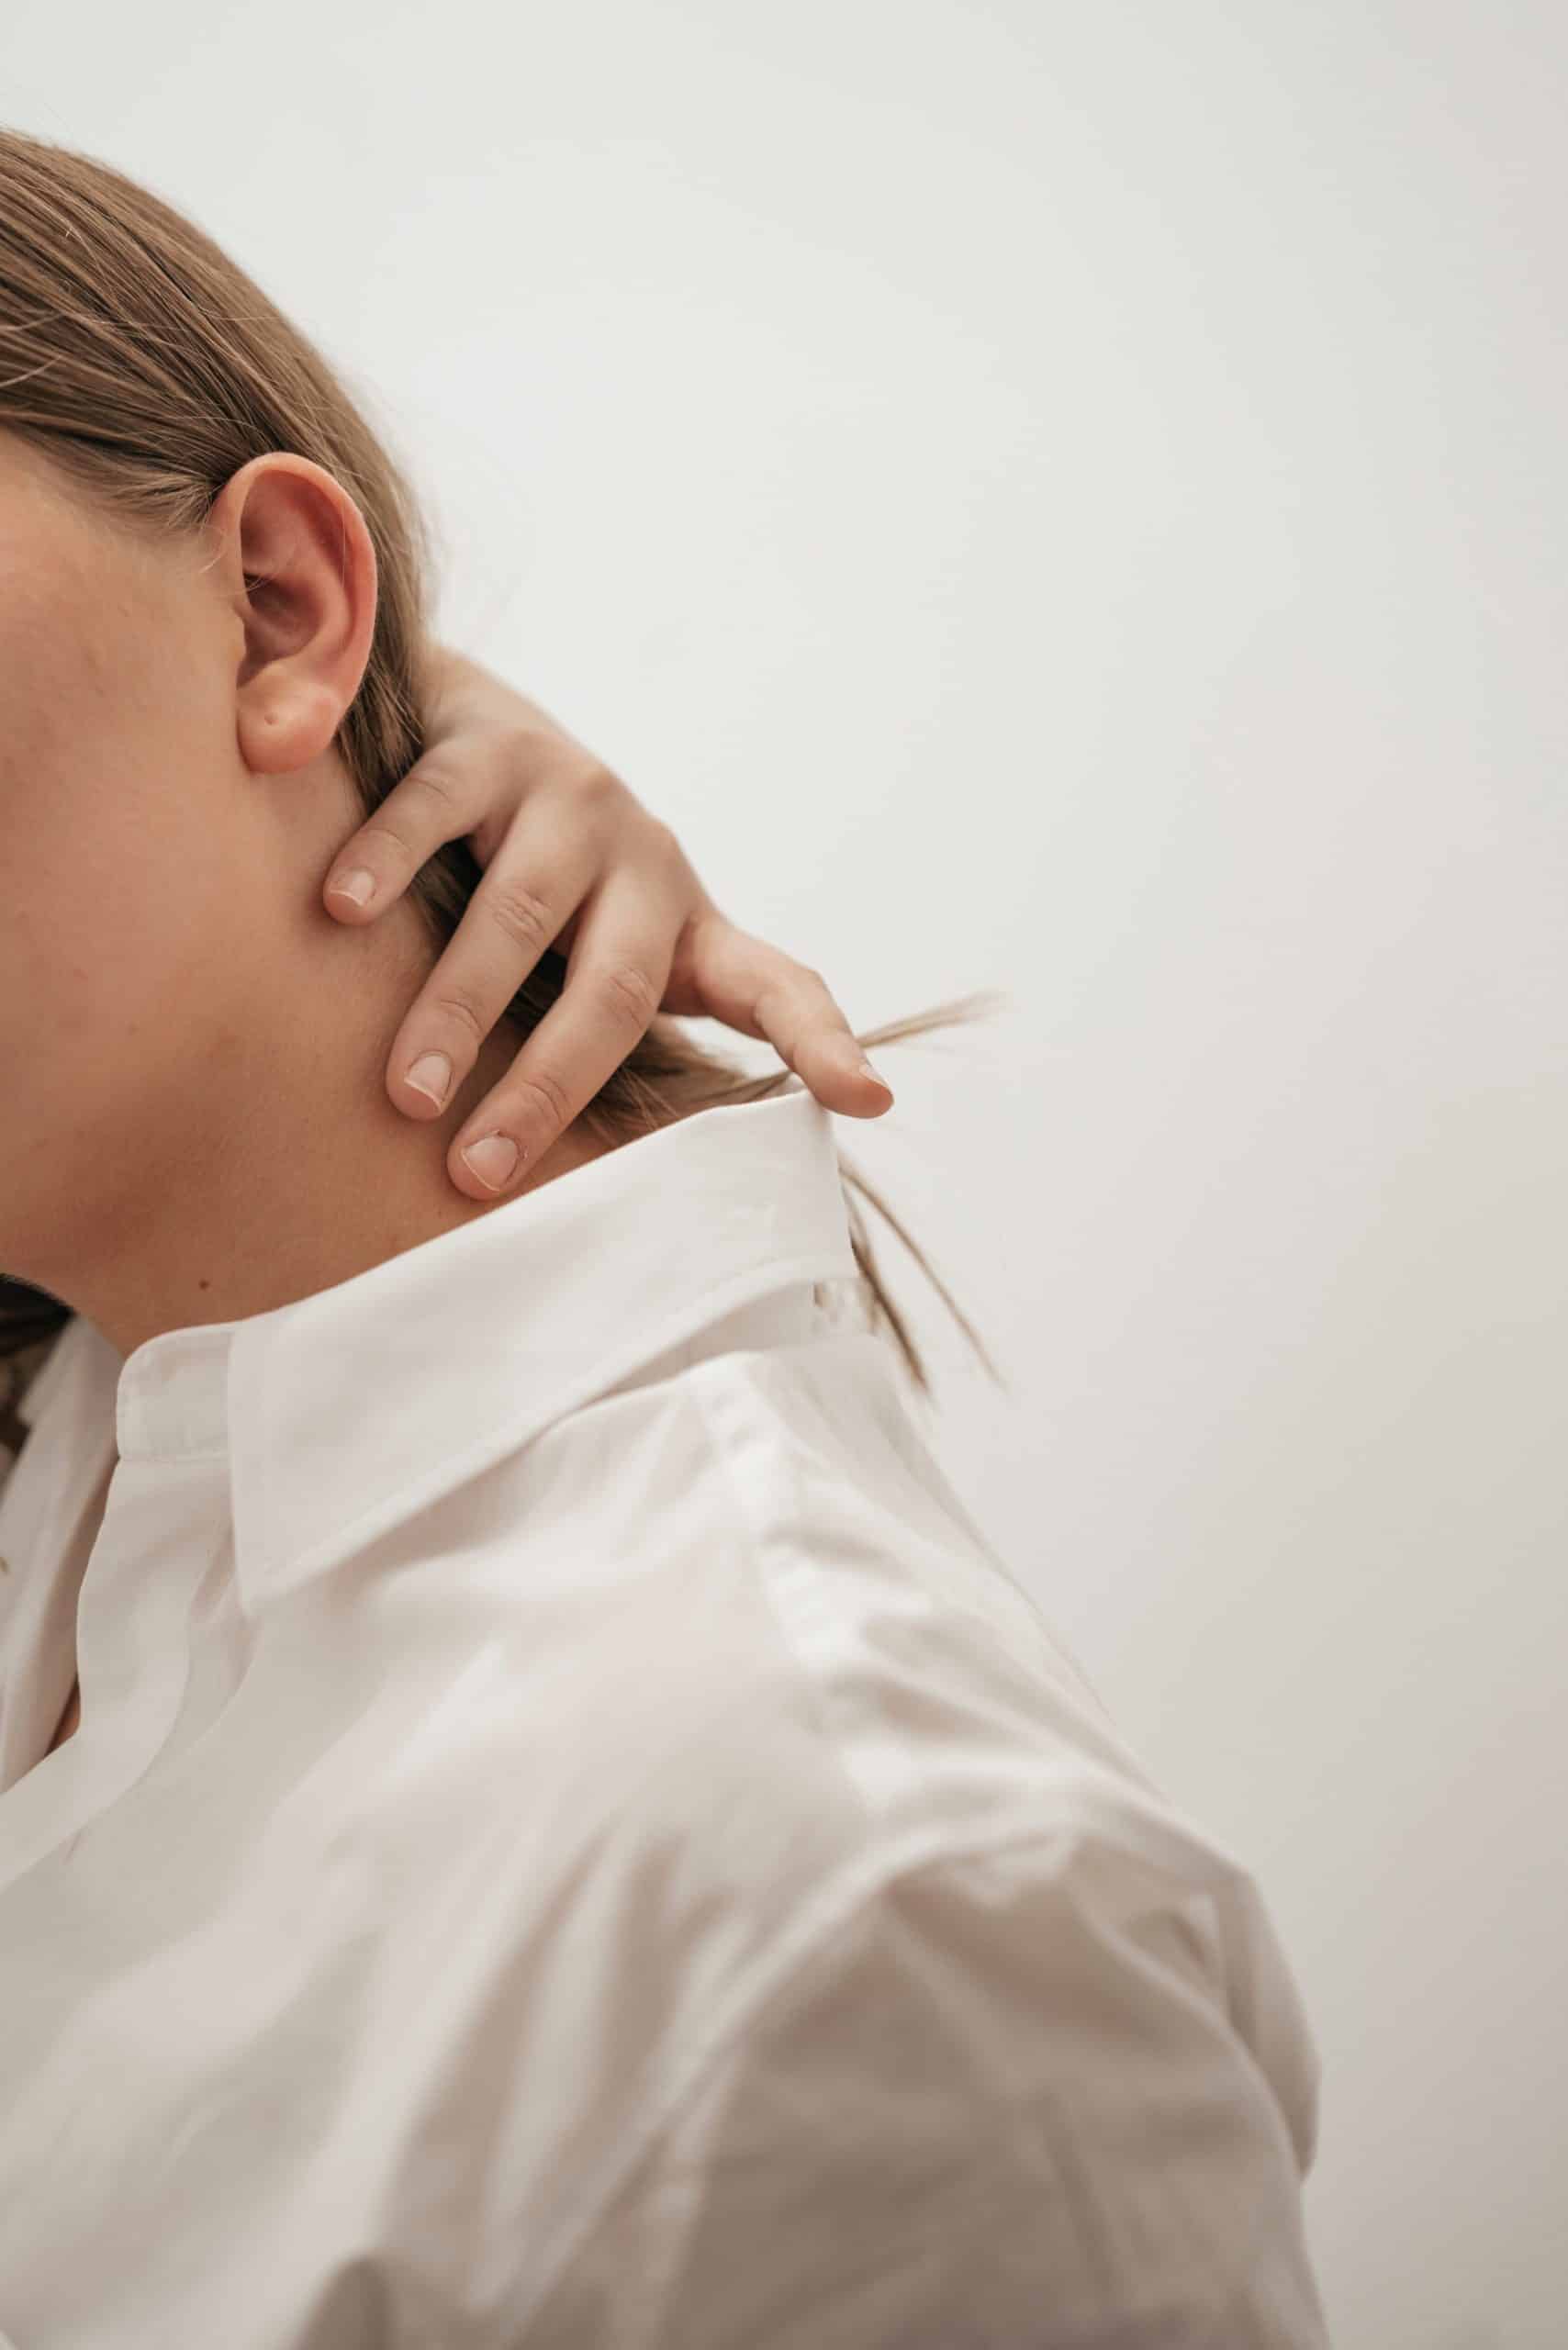 Woman reaching back to her neck in pain